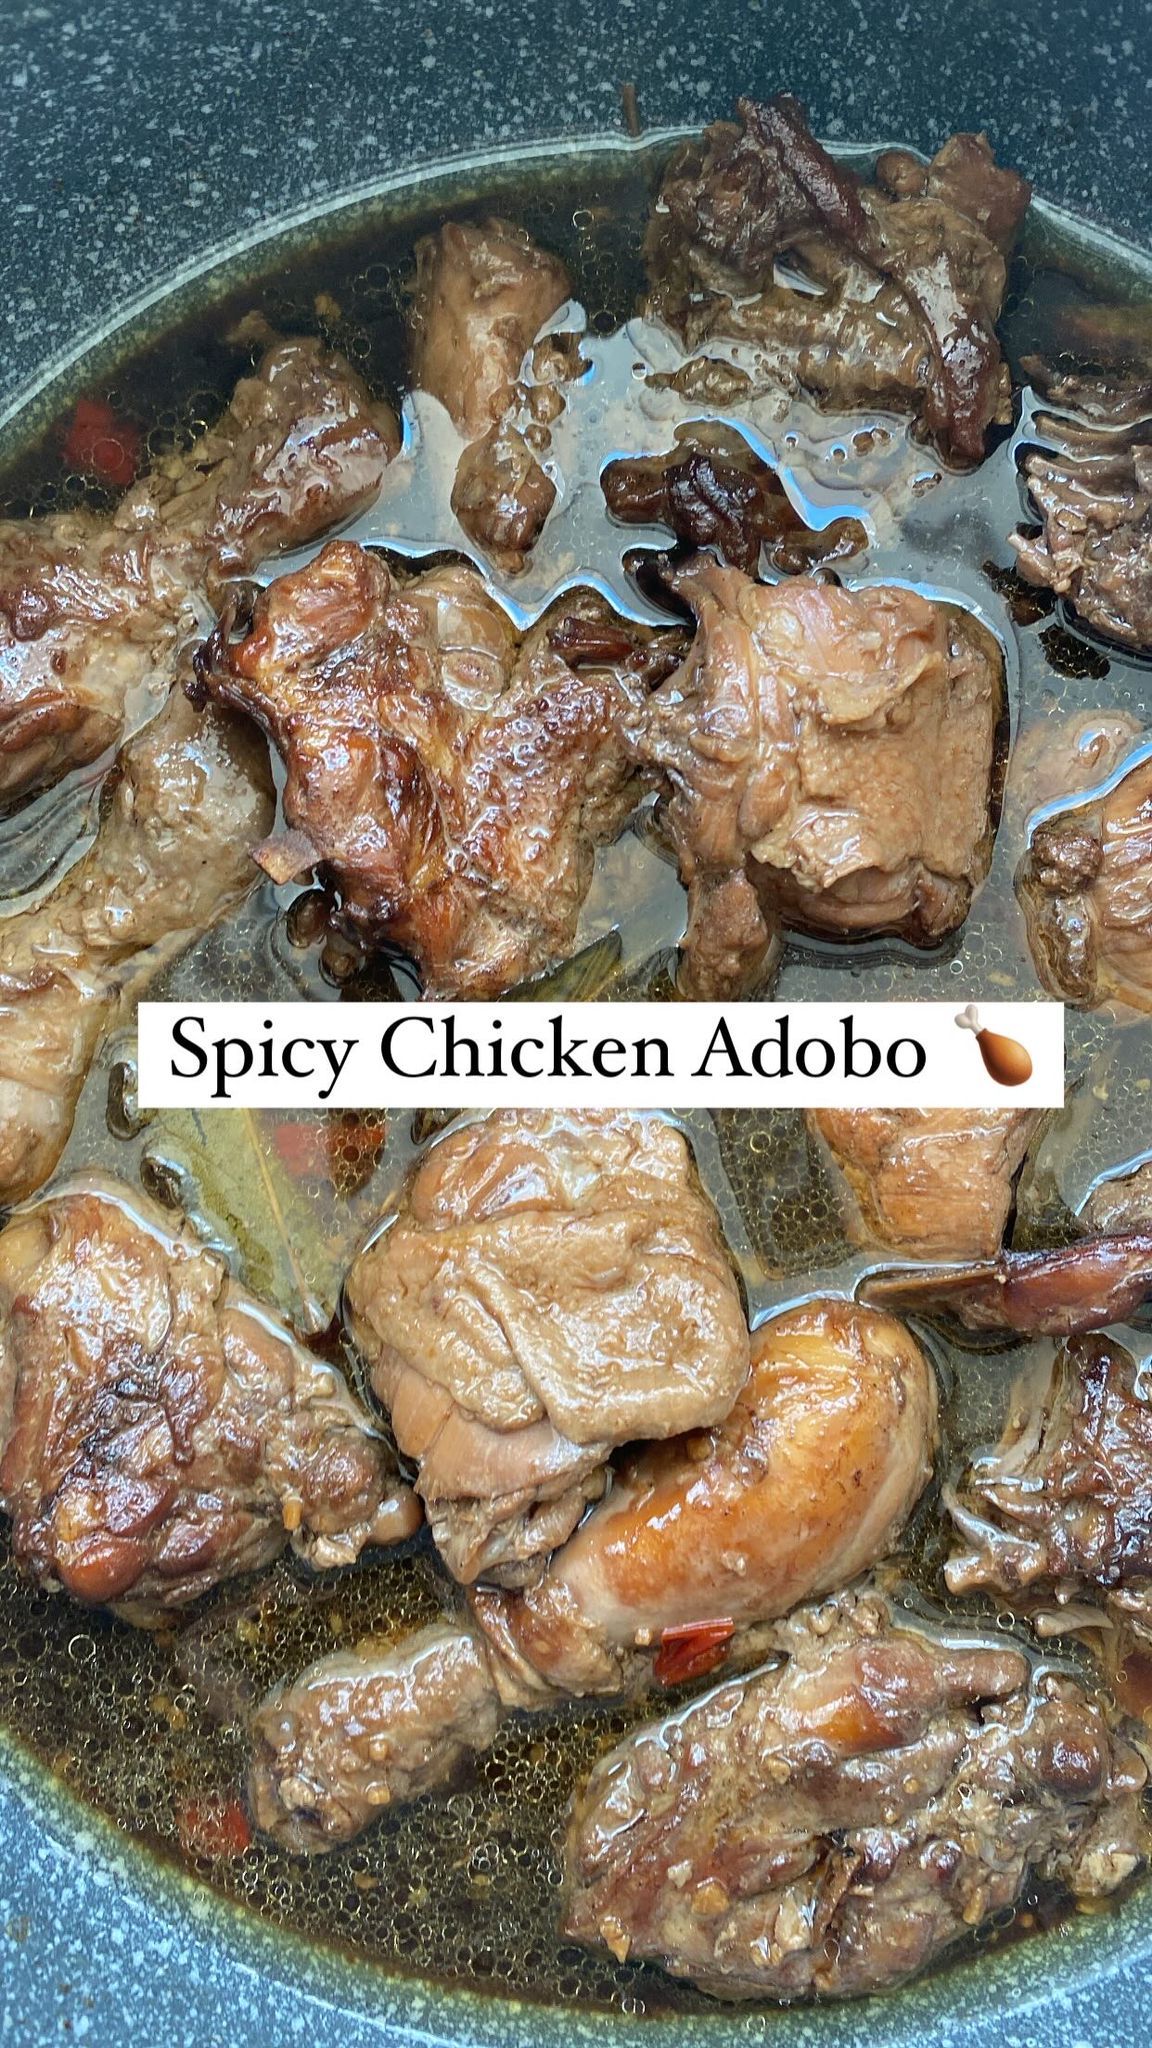 Mild Spicy Chicken Adobo with Free Garlic Rice good for 10pax